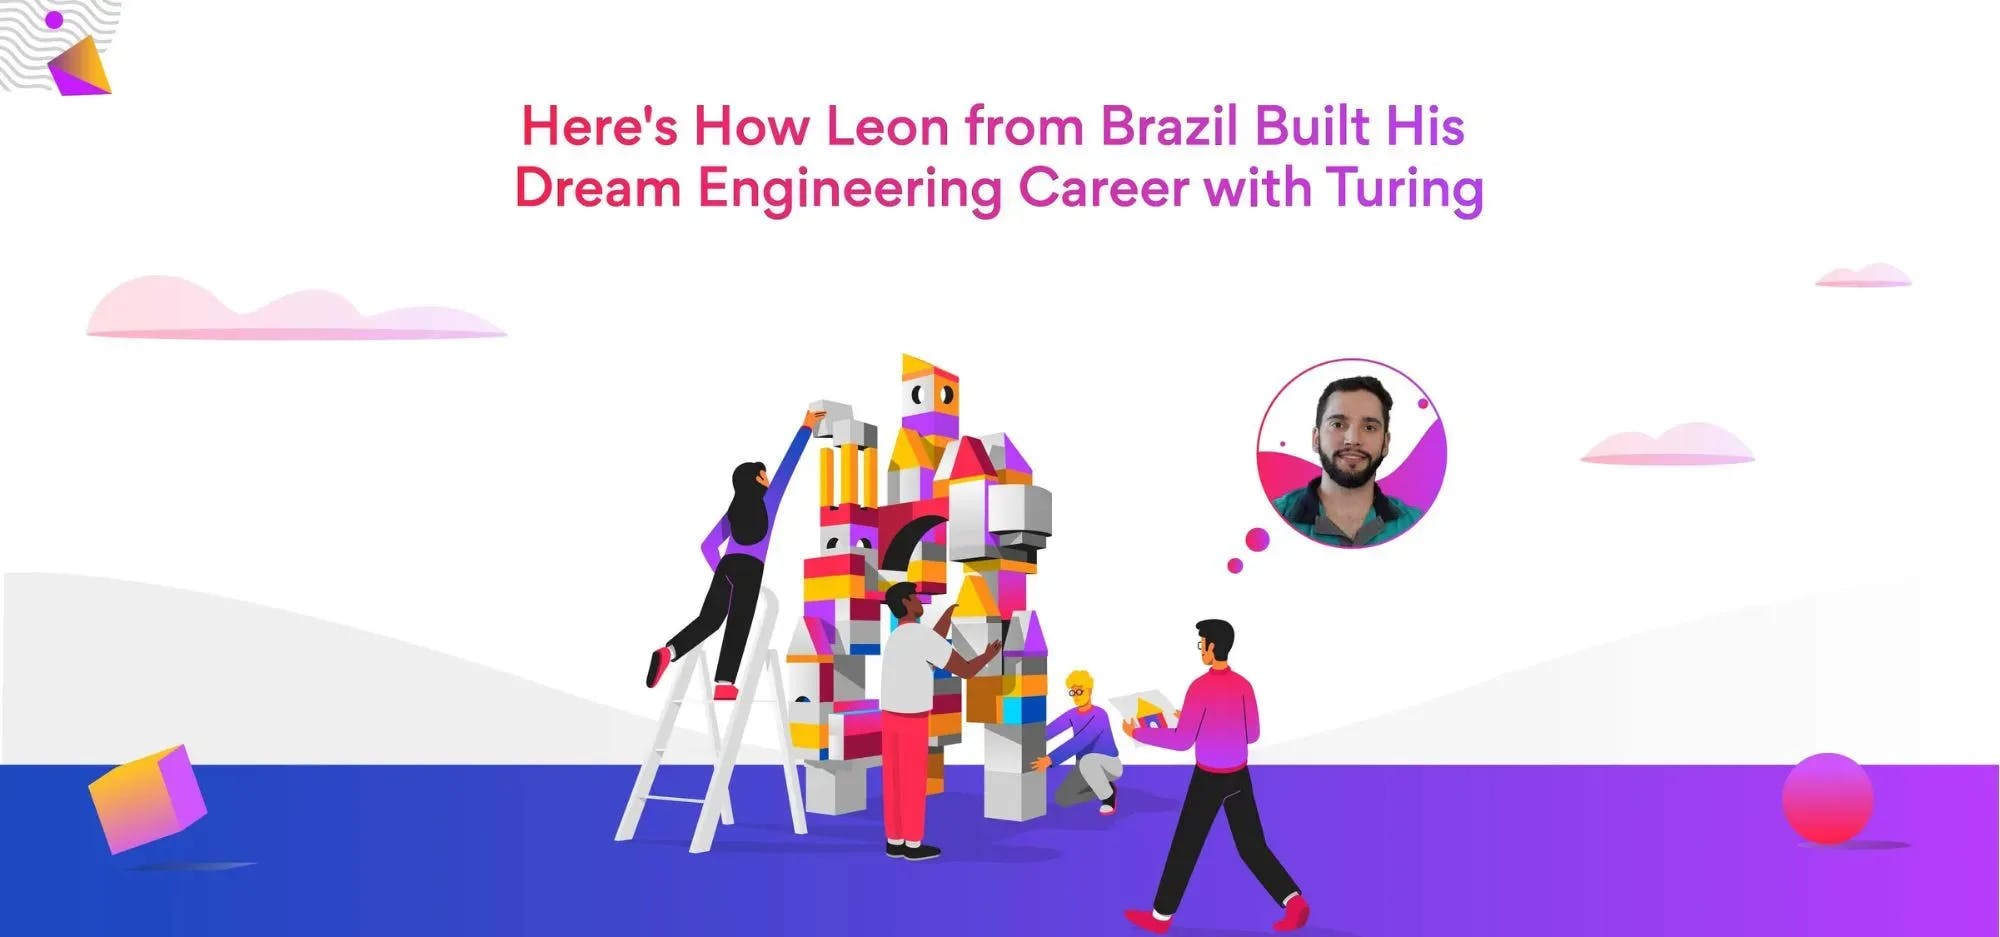 Here’s How Leon from Brazil Built His Dream Engineering Career with Turing